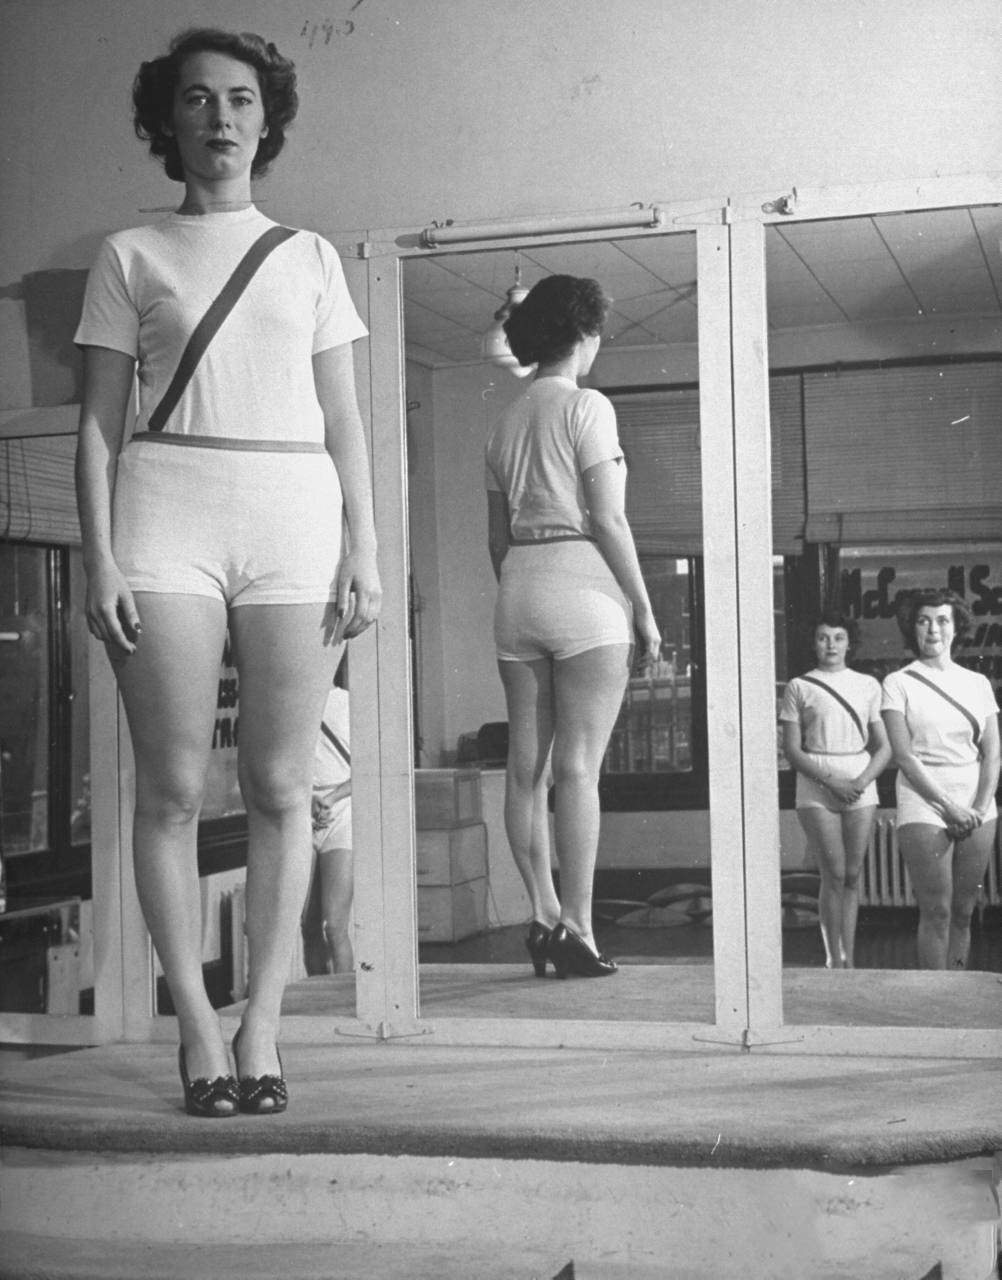 Women checking their posture at the McConnell Air Hostess School.